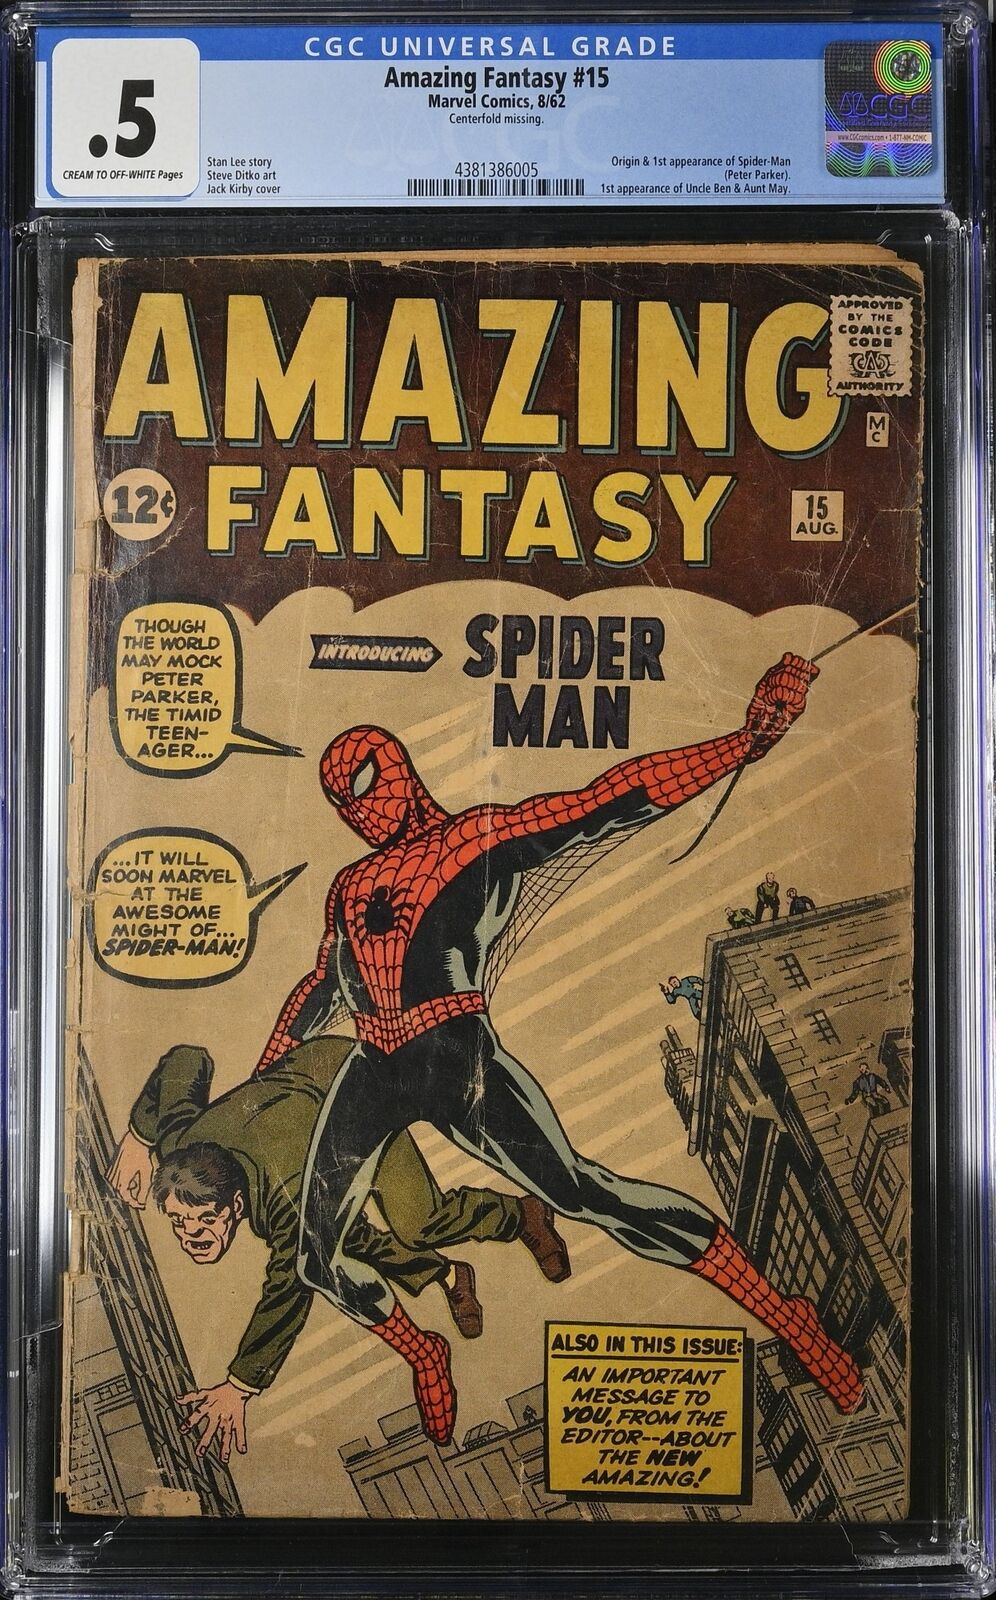 Amazing Fantasy #15 CGC P 0.5 1st Appearance Spider-Man Kirby Cover Marvel 1962